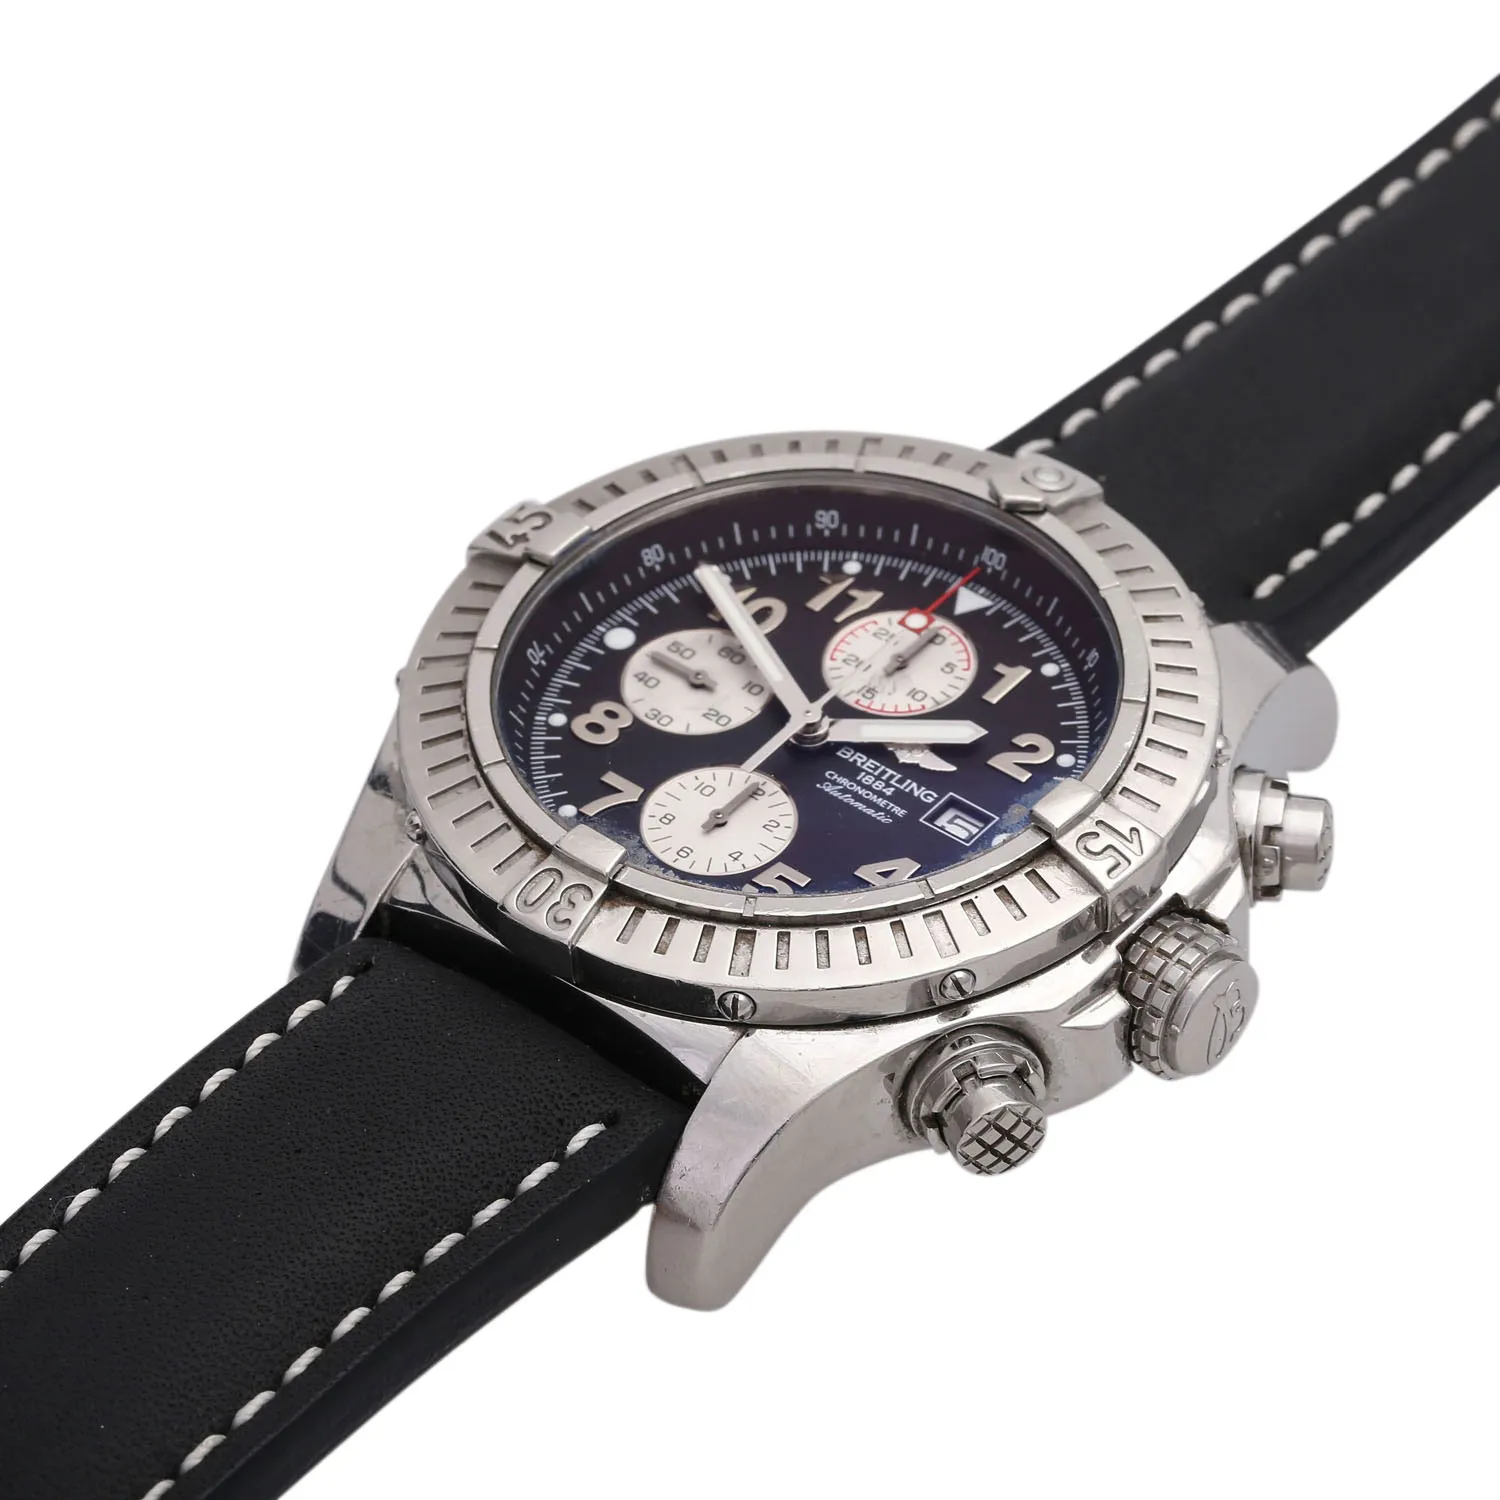 Breitling Avenger A13370 48mm Stainless steel bi-color black and silver 3